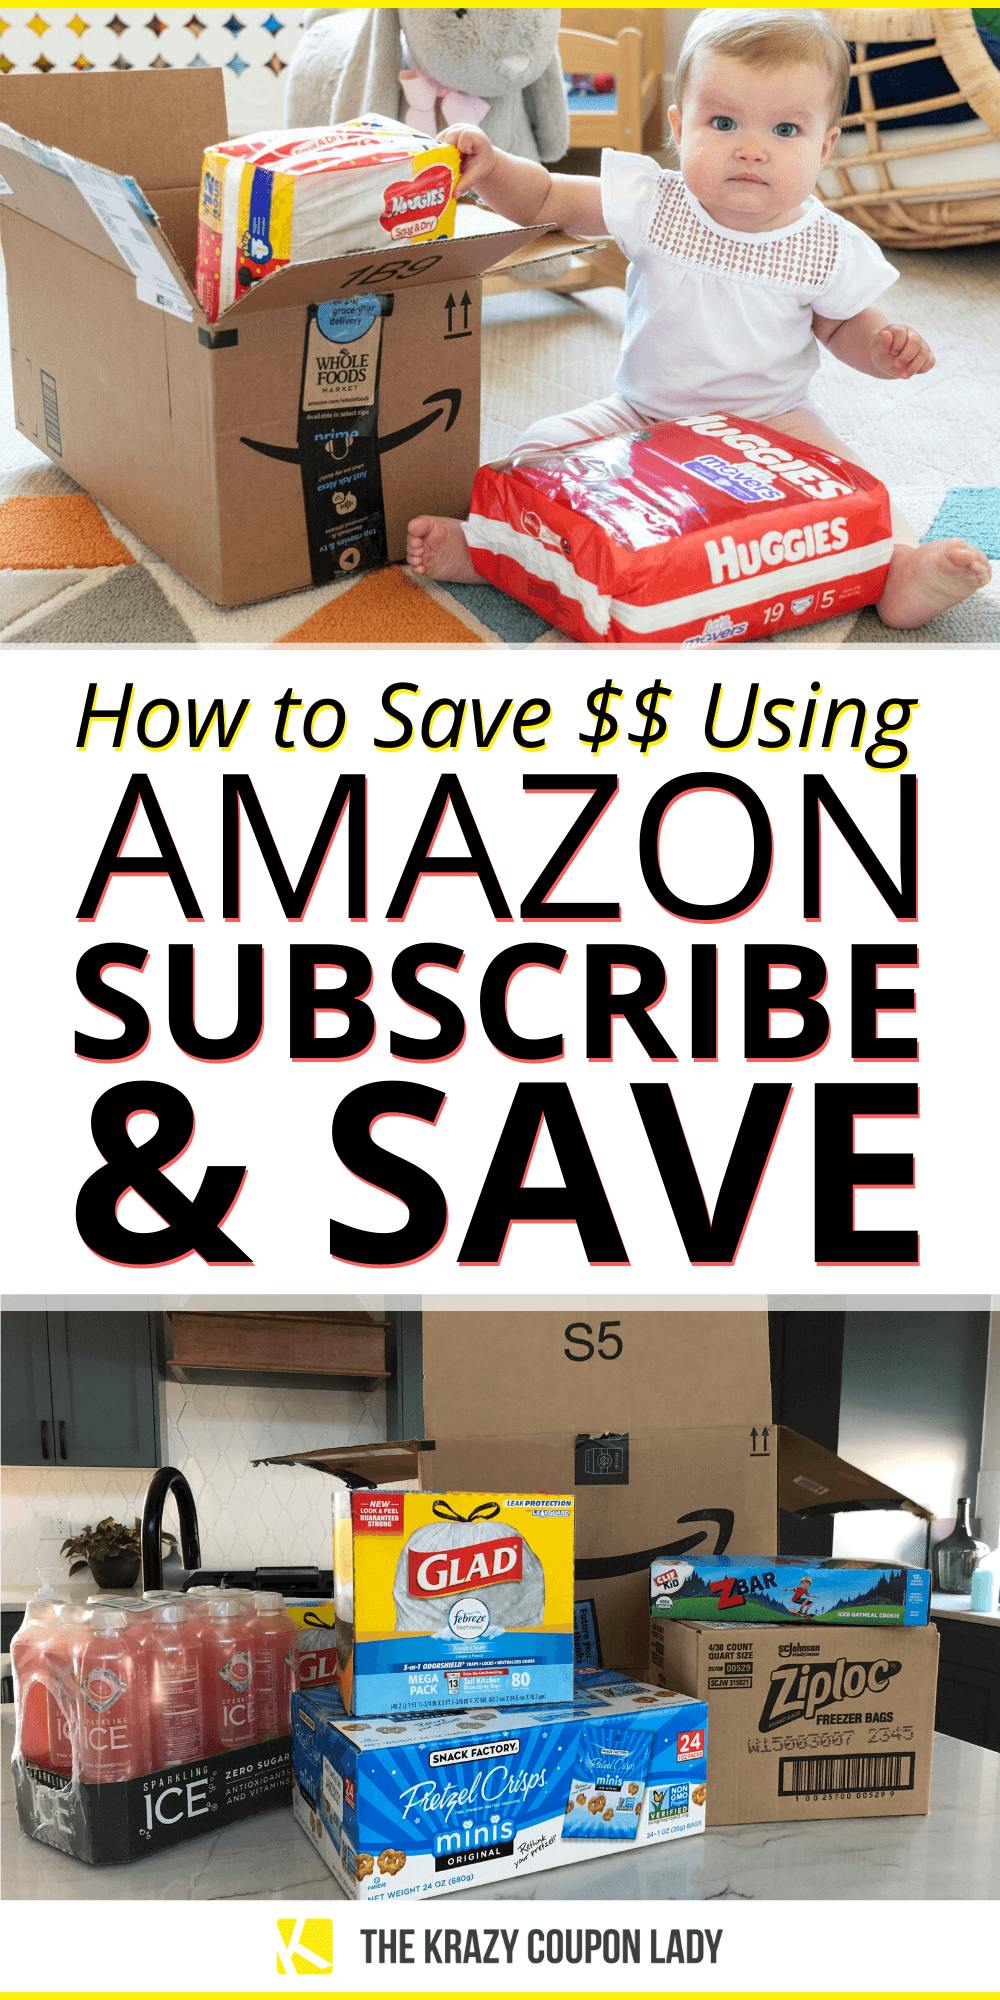 10 Ways to Squeeze the Most Value From Amazon Subscribe & Save